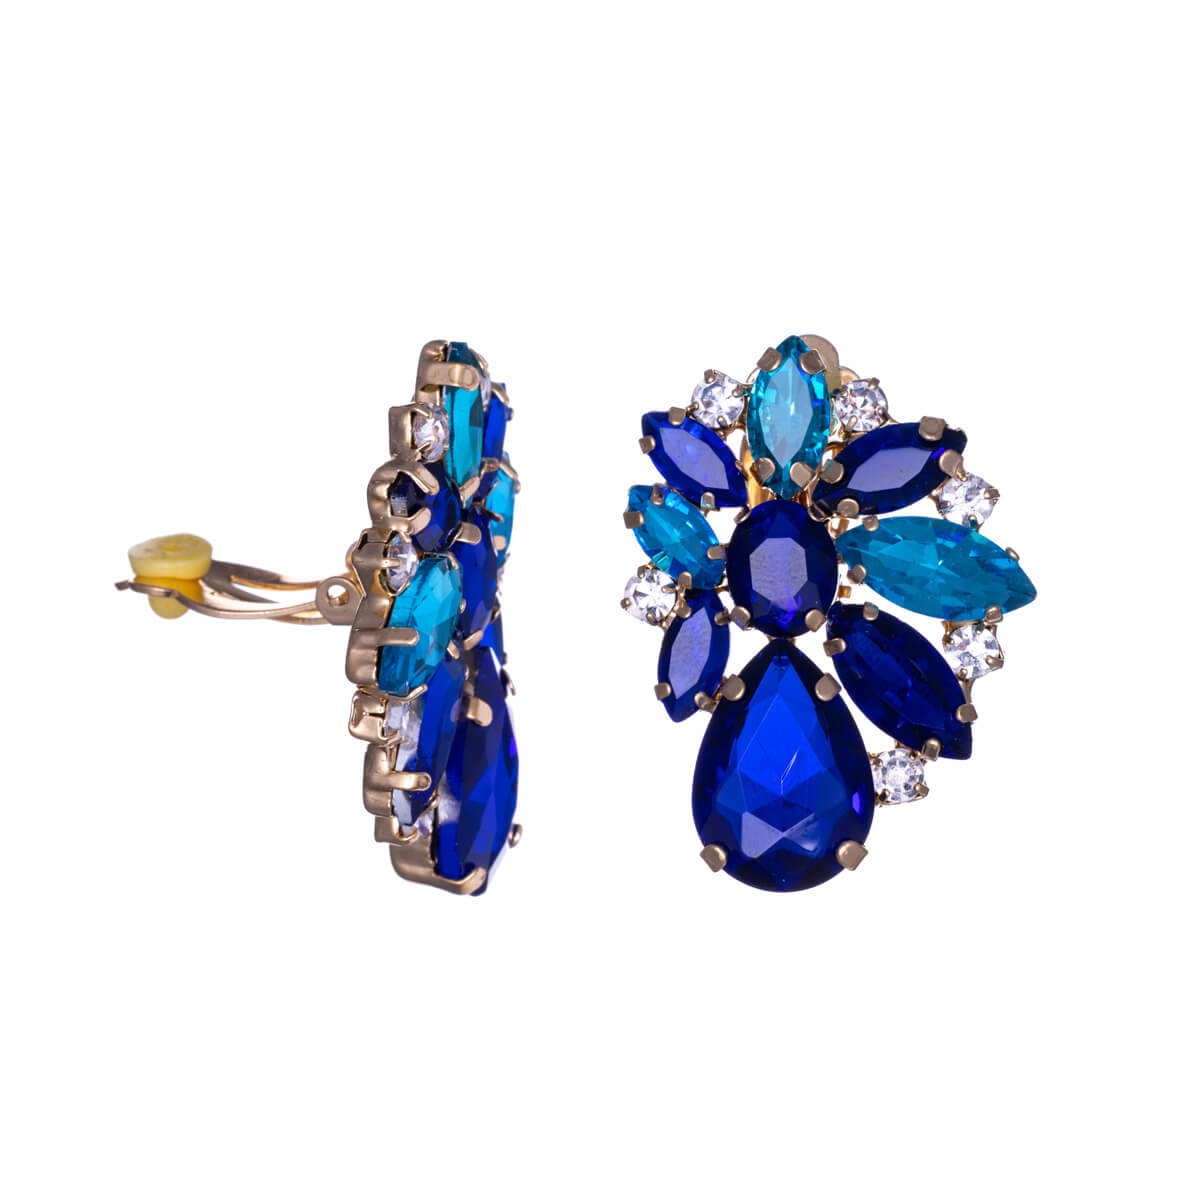 Showy festive clip earrings with glass stones